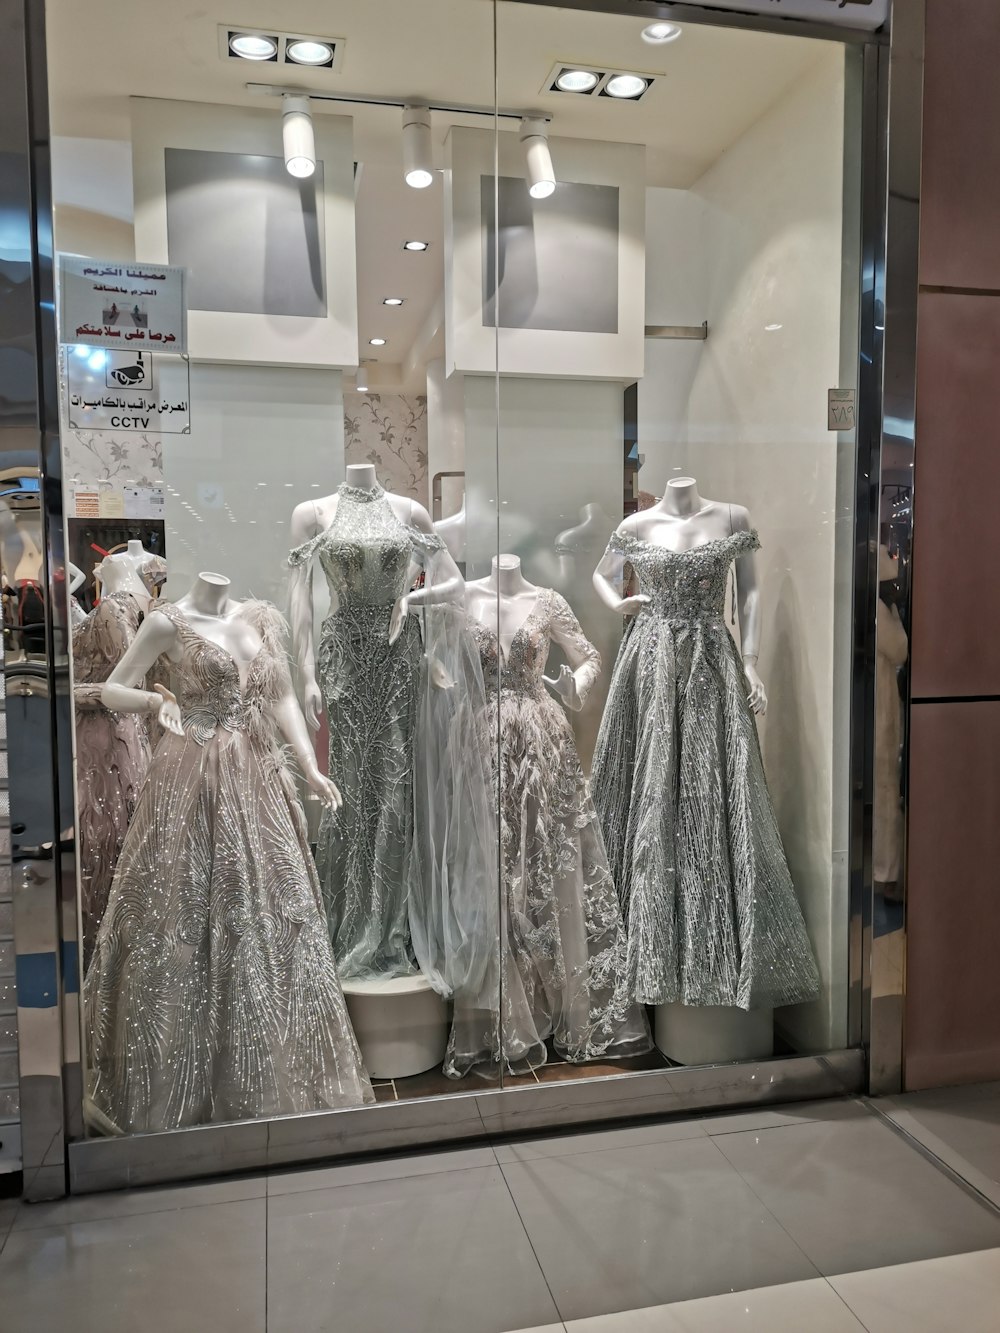 a display of dresses in a store window